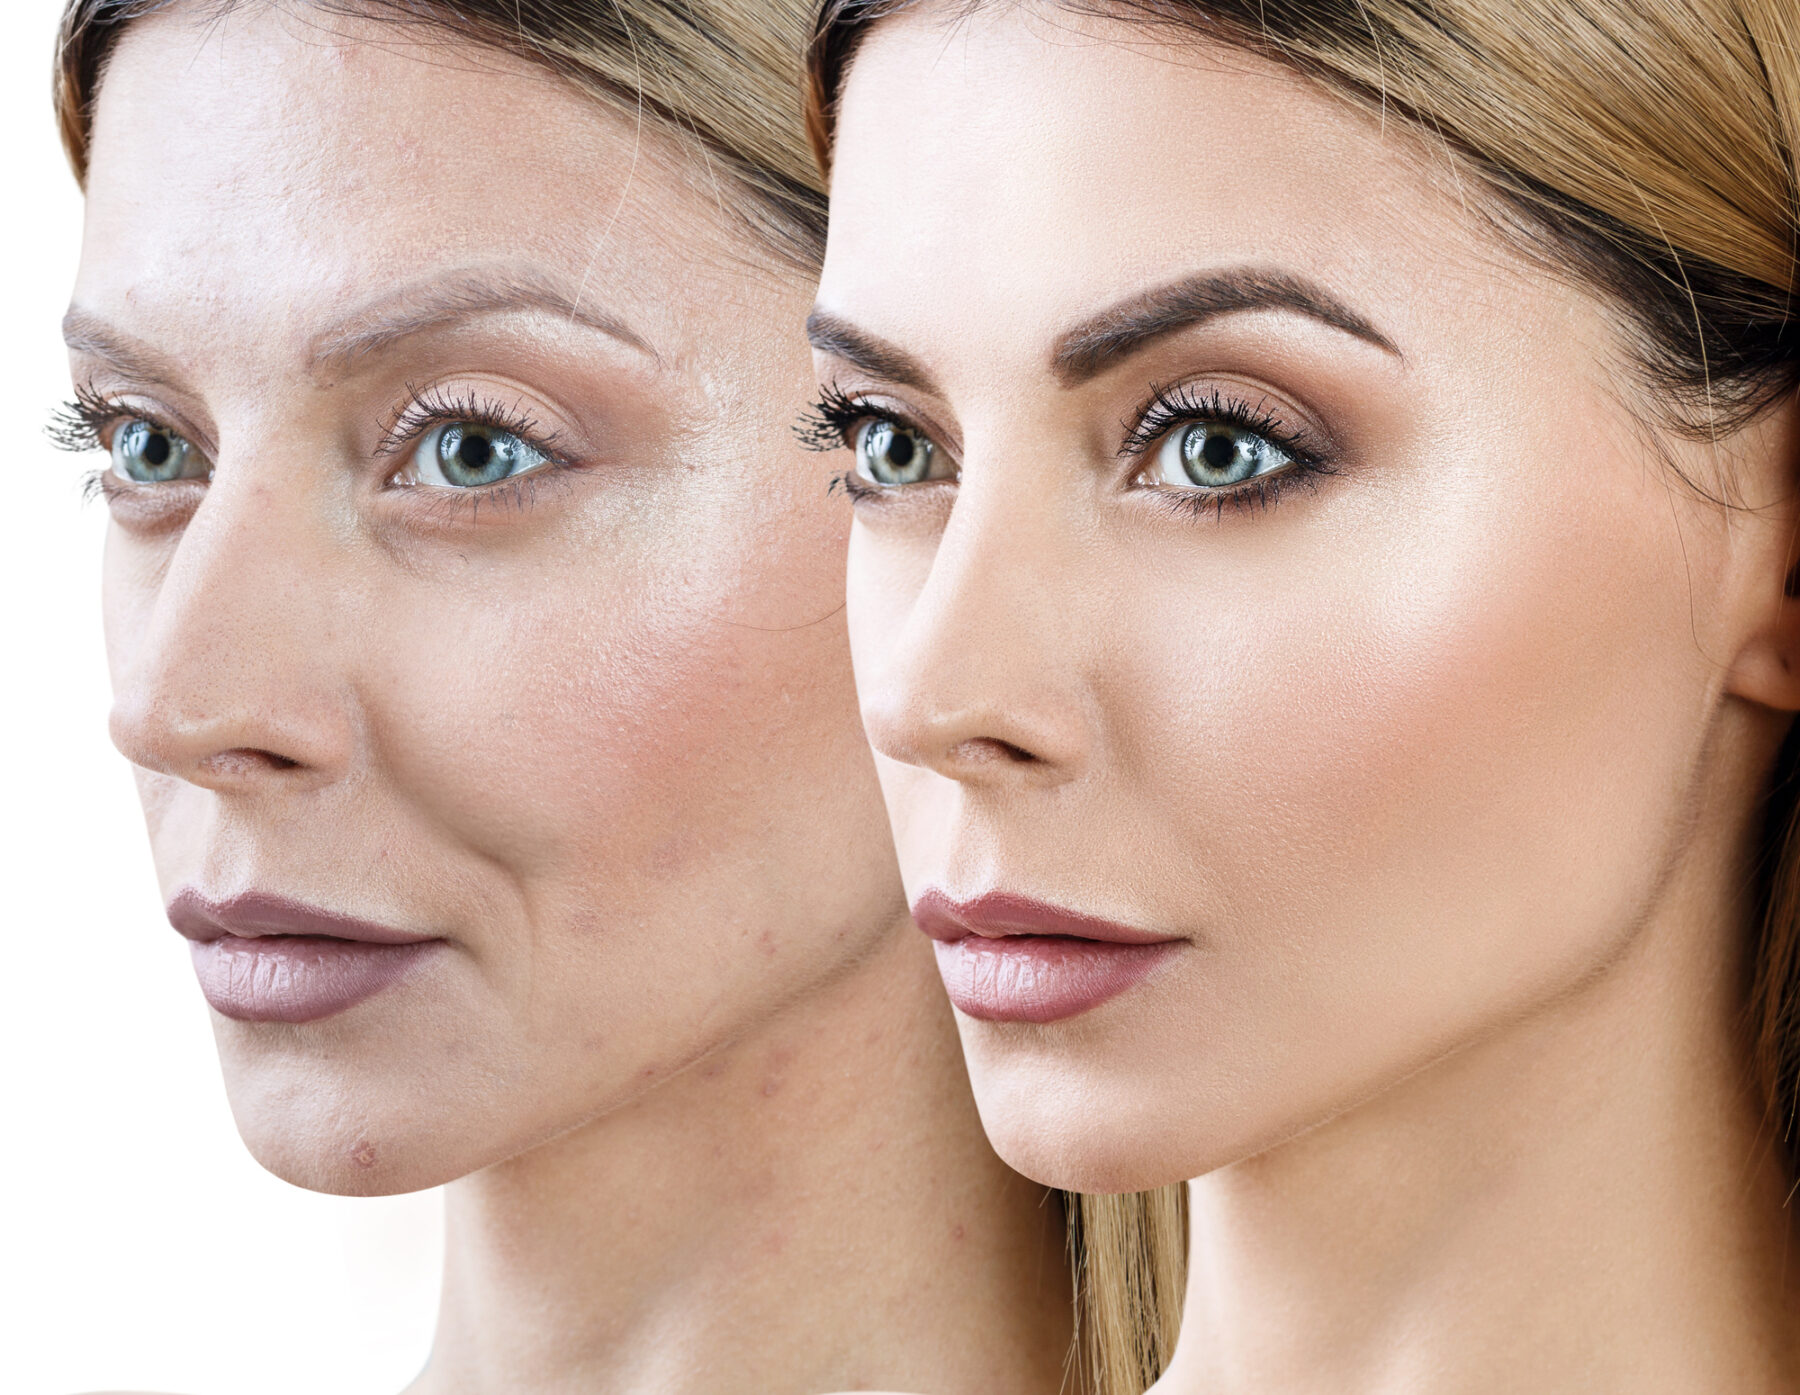 Woman Anti-aging before and after rejuvenation with NAD and NMN